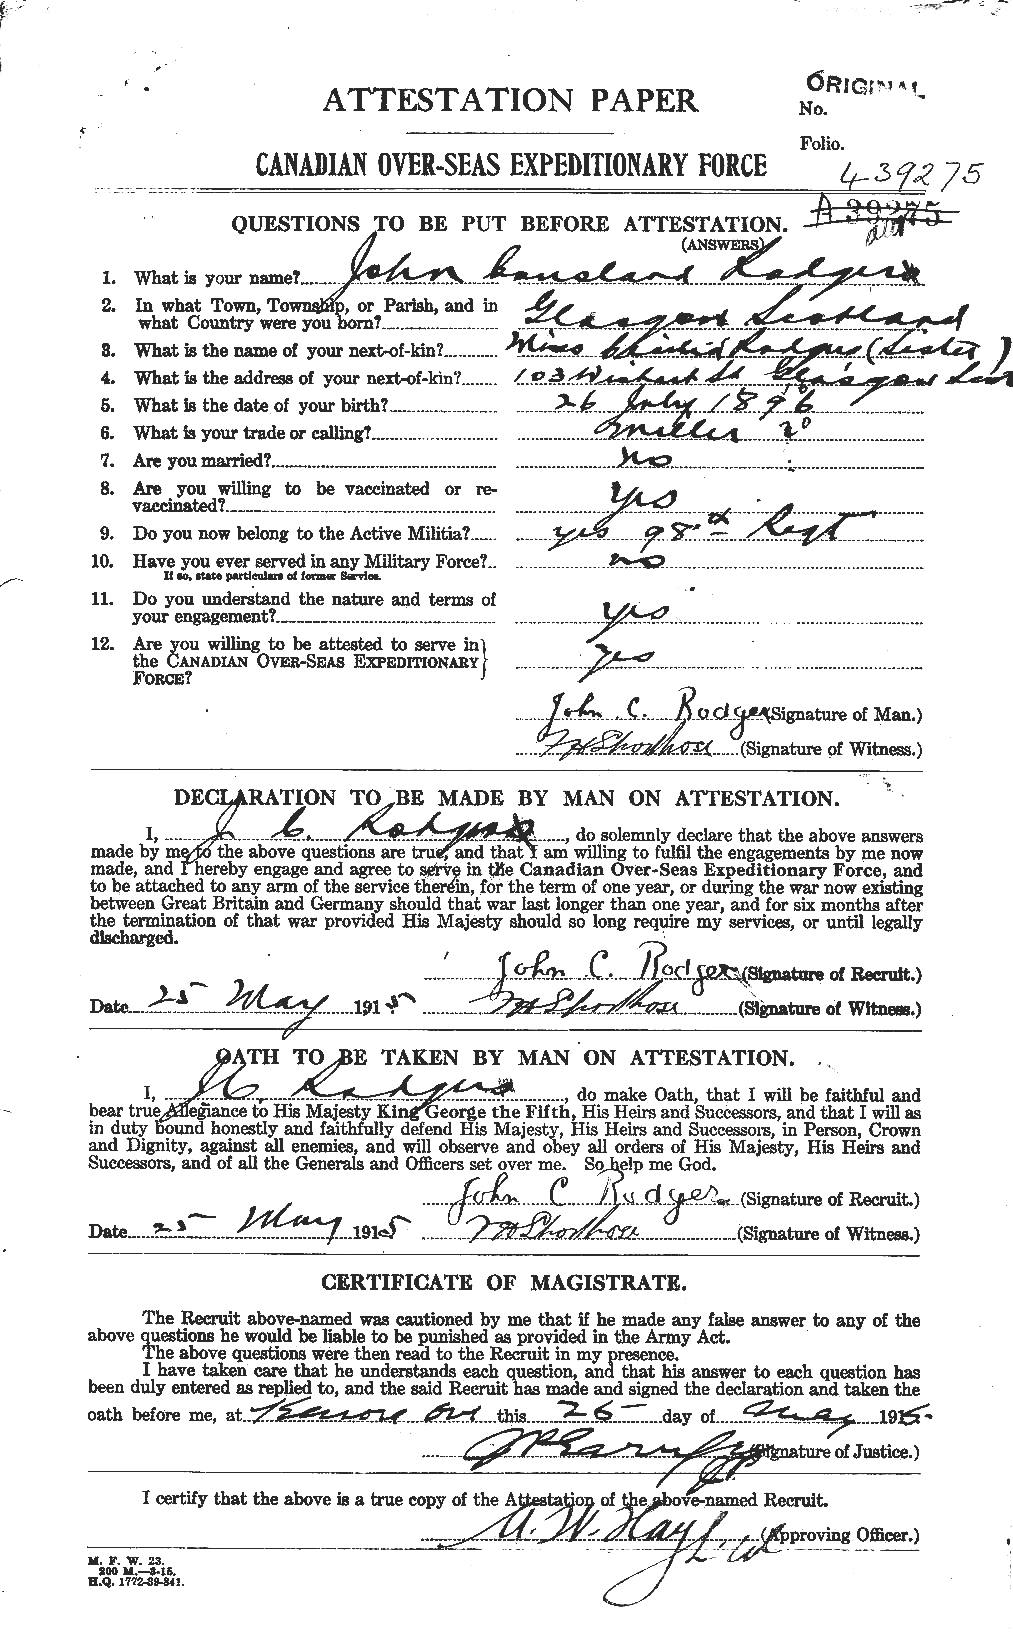 Personnel Records of the First World War - CEF 609362a